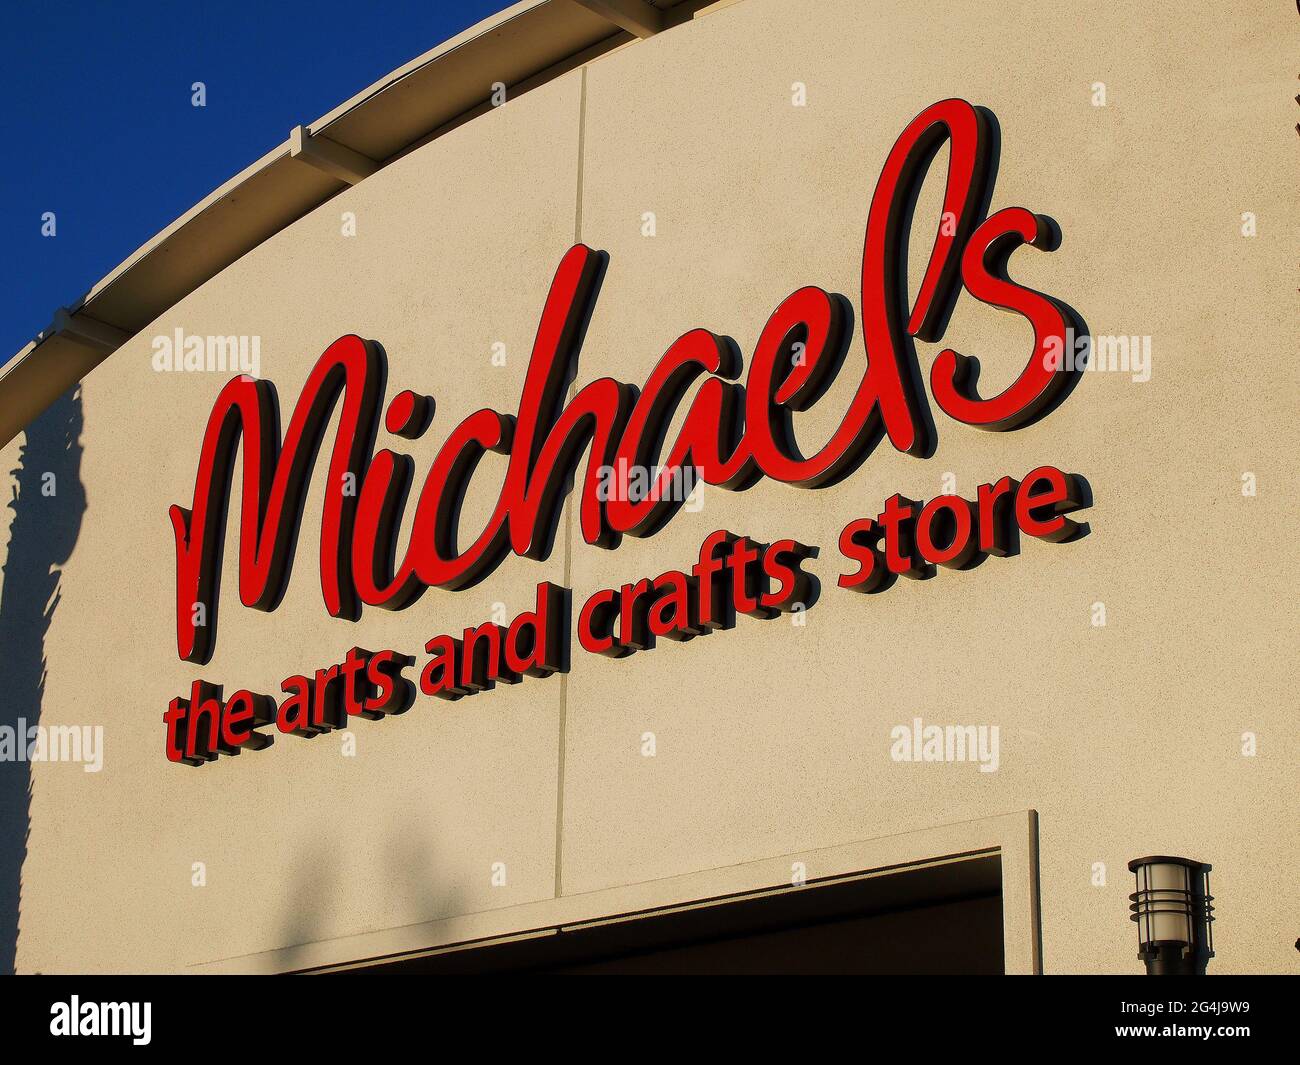 Michaels arts and crafts store hi-res stock photography and images